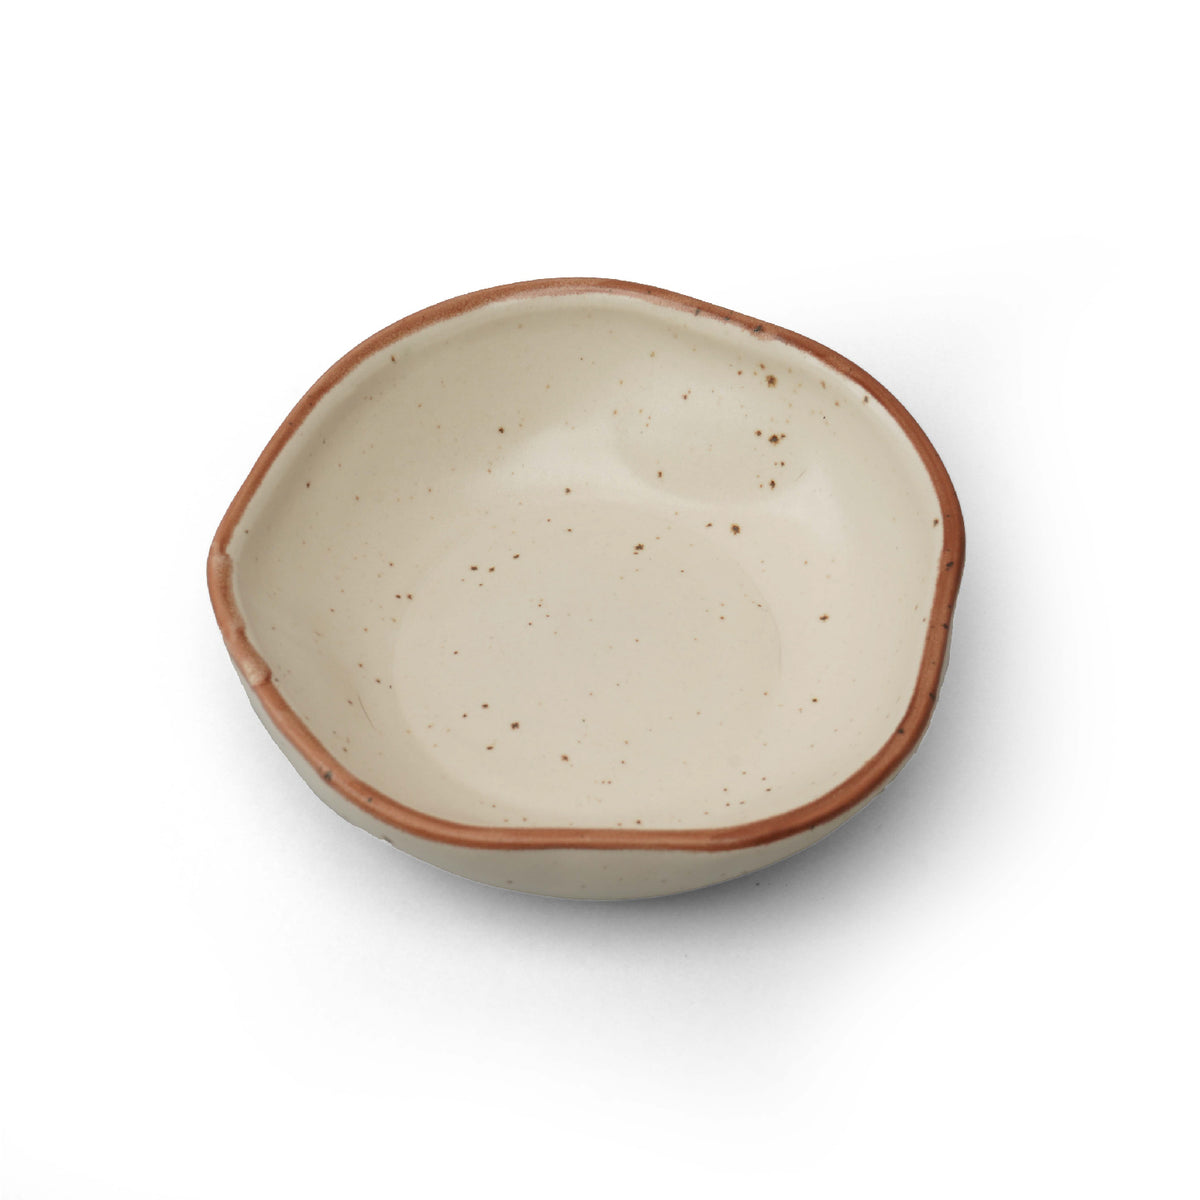 Offbeat Ivory Bowl: Because Symmetry is Overrated!